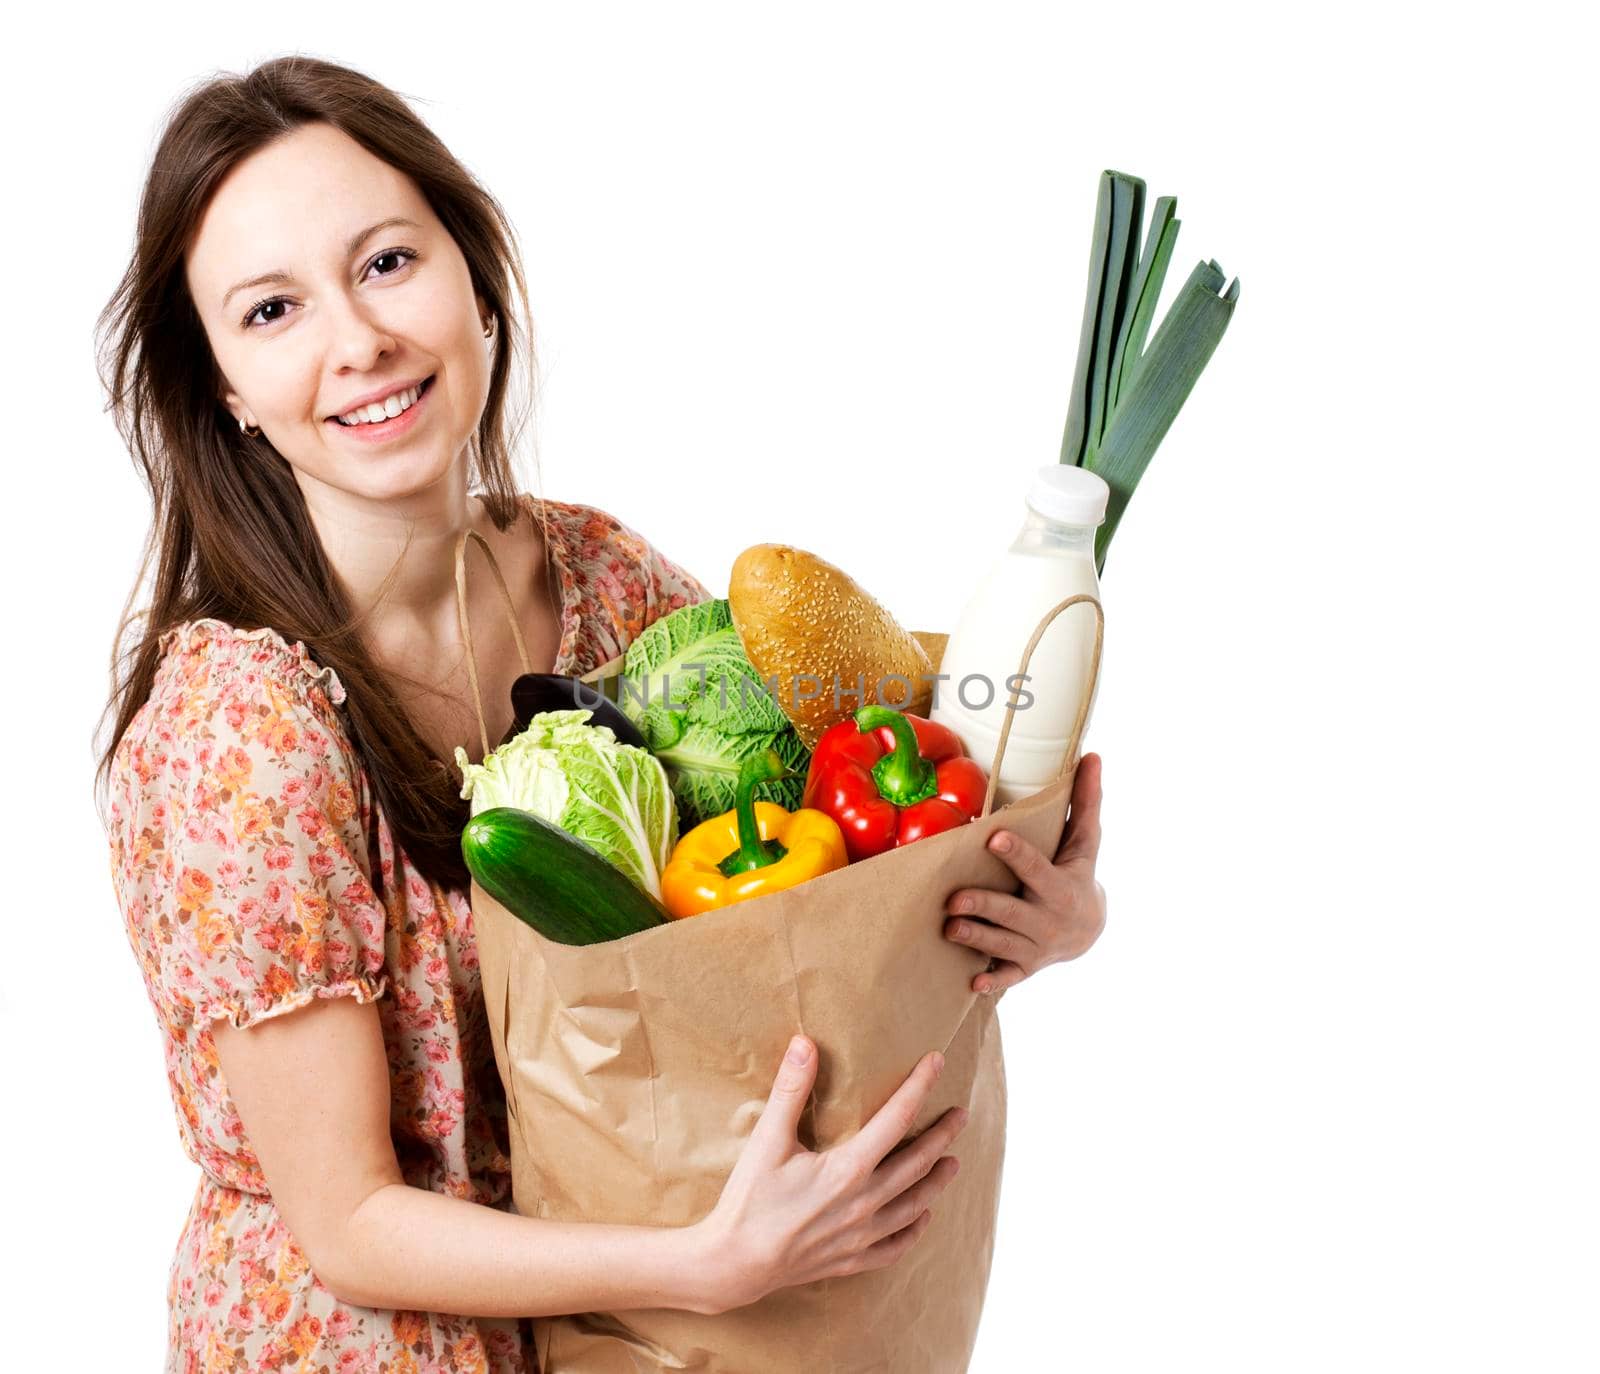 Woman Holding Large Bag of Healthly Groceries by Jyliana